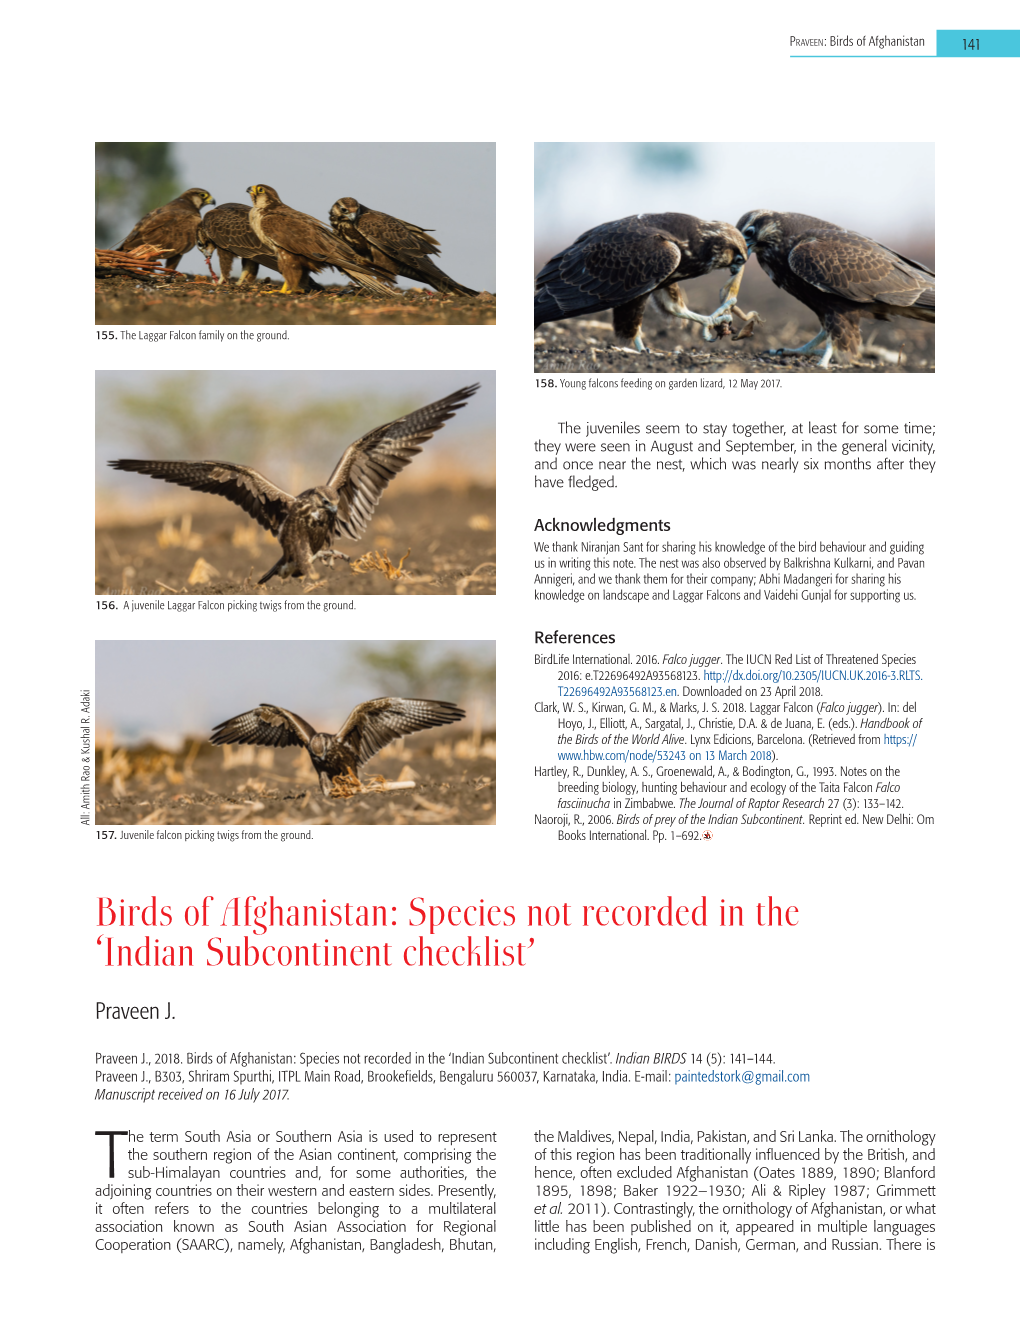 Birds of Afghanistan: Species Not Recorded in the 'Indian